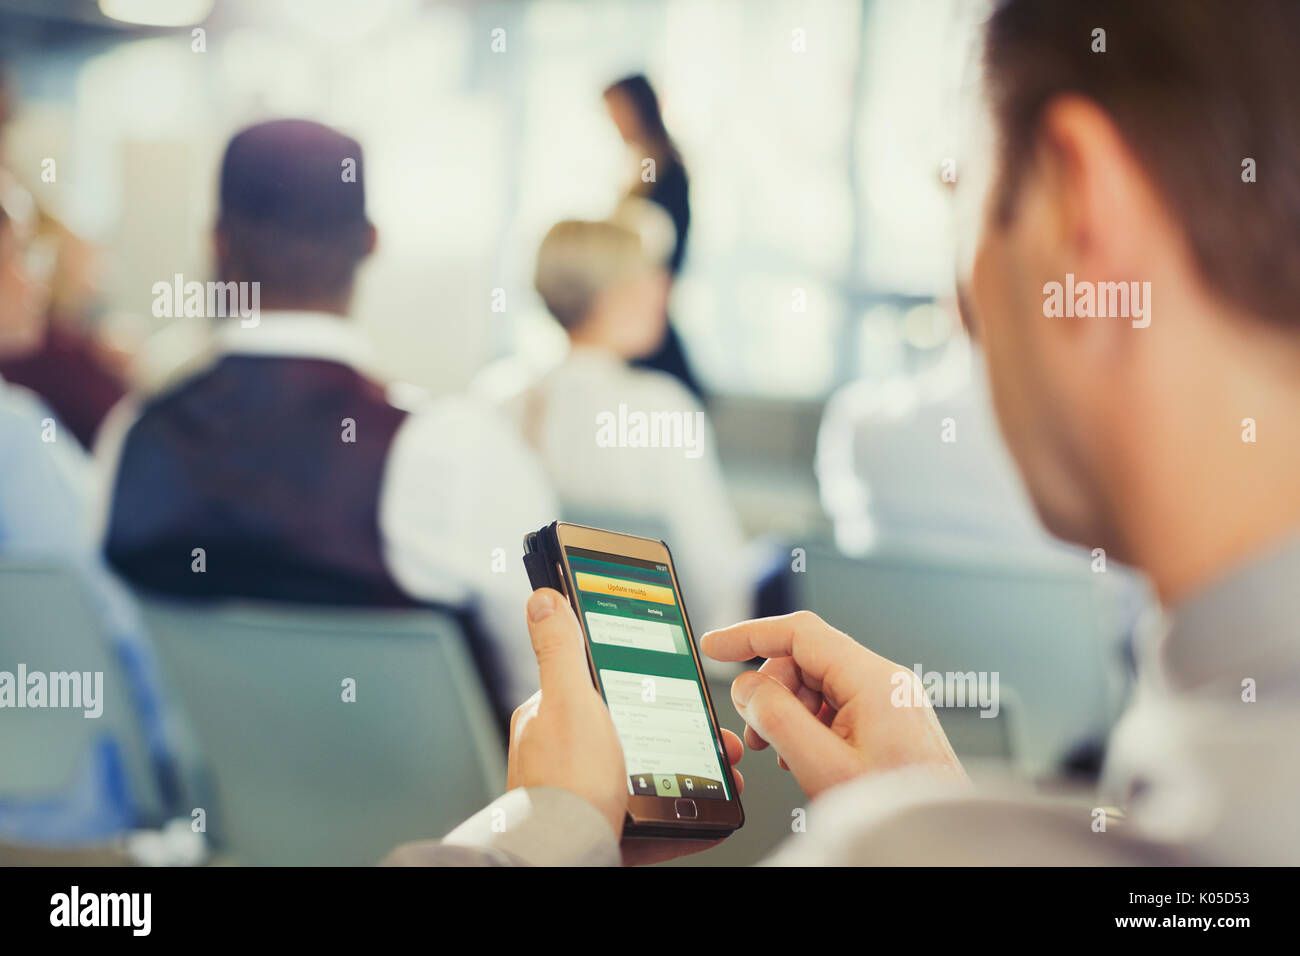 Businessman texting with cell phone in public conférence Banque D'Images